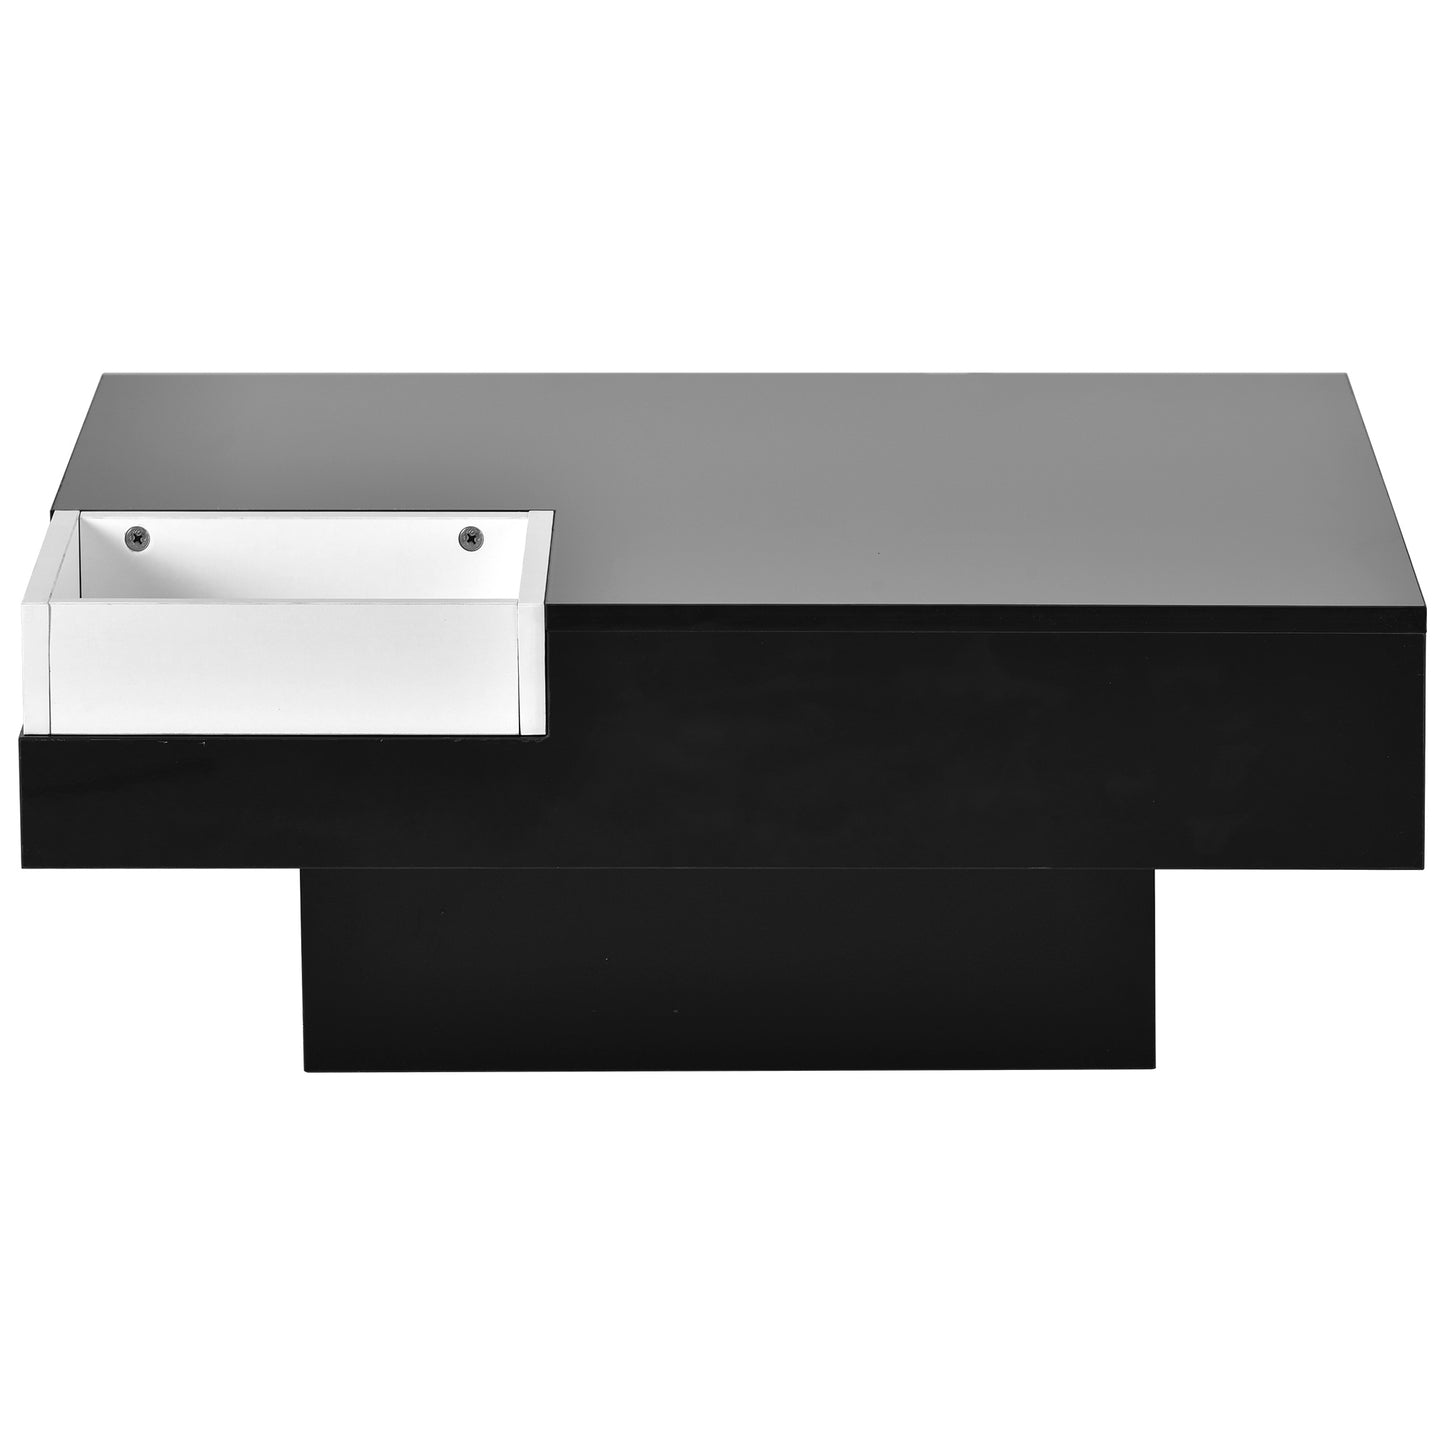 Square Coffee Table with Detachable Tray and Plug-in 16-color LED Strip Lights Remote Control